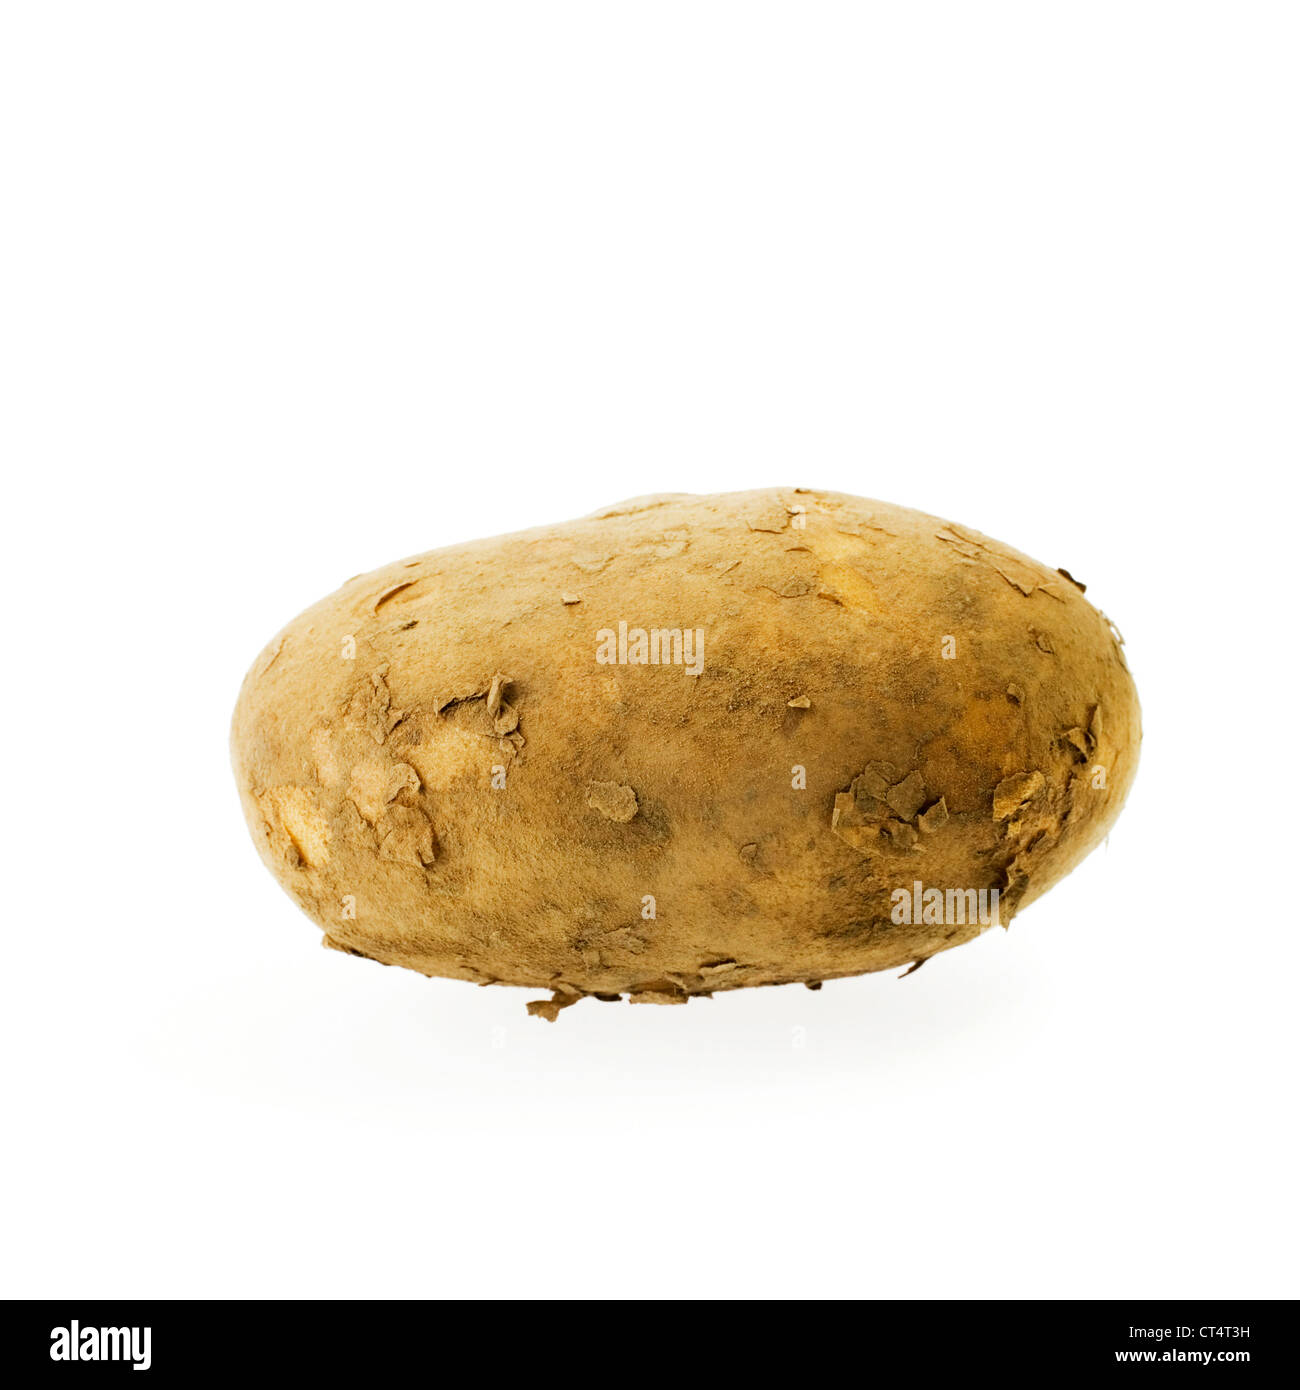 Baking potato on white with very soft shadow, unwashed and with soil still on it. Stock Photo